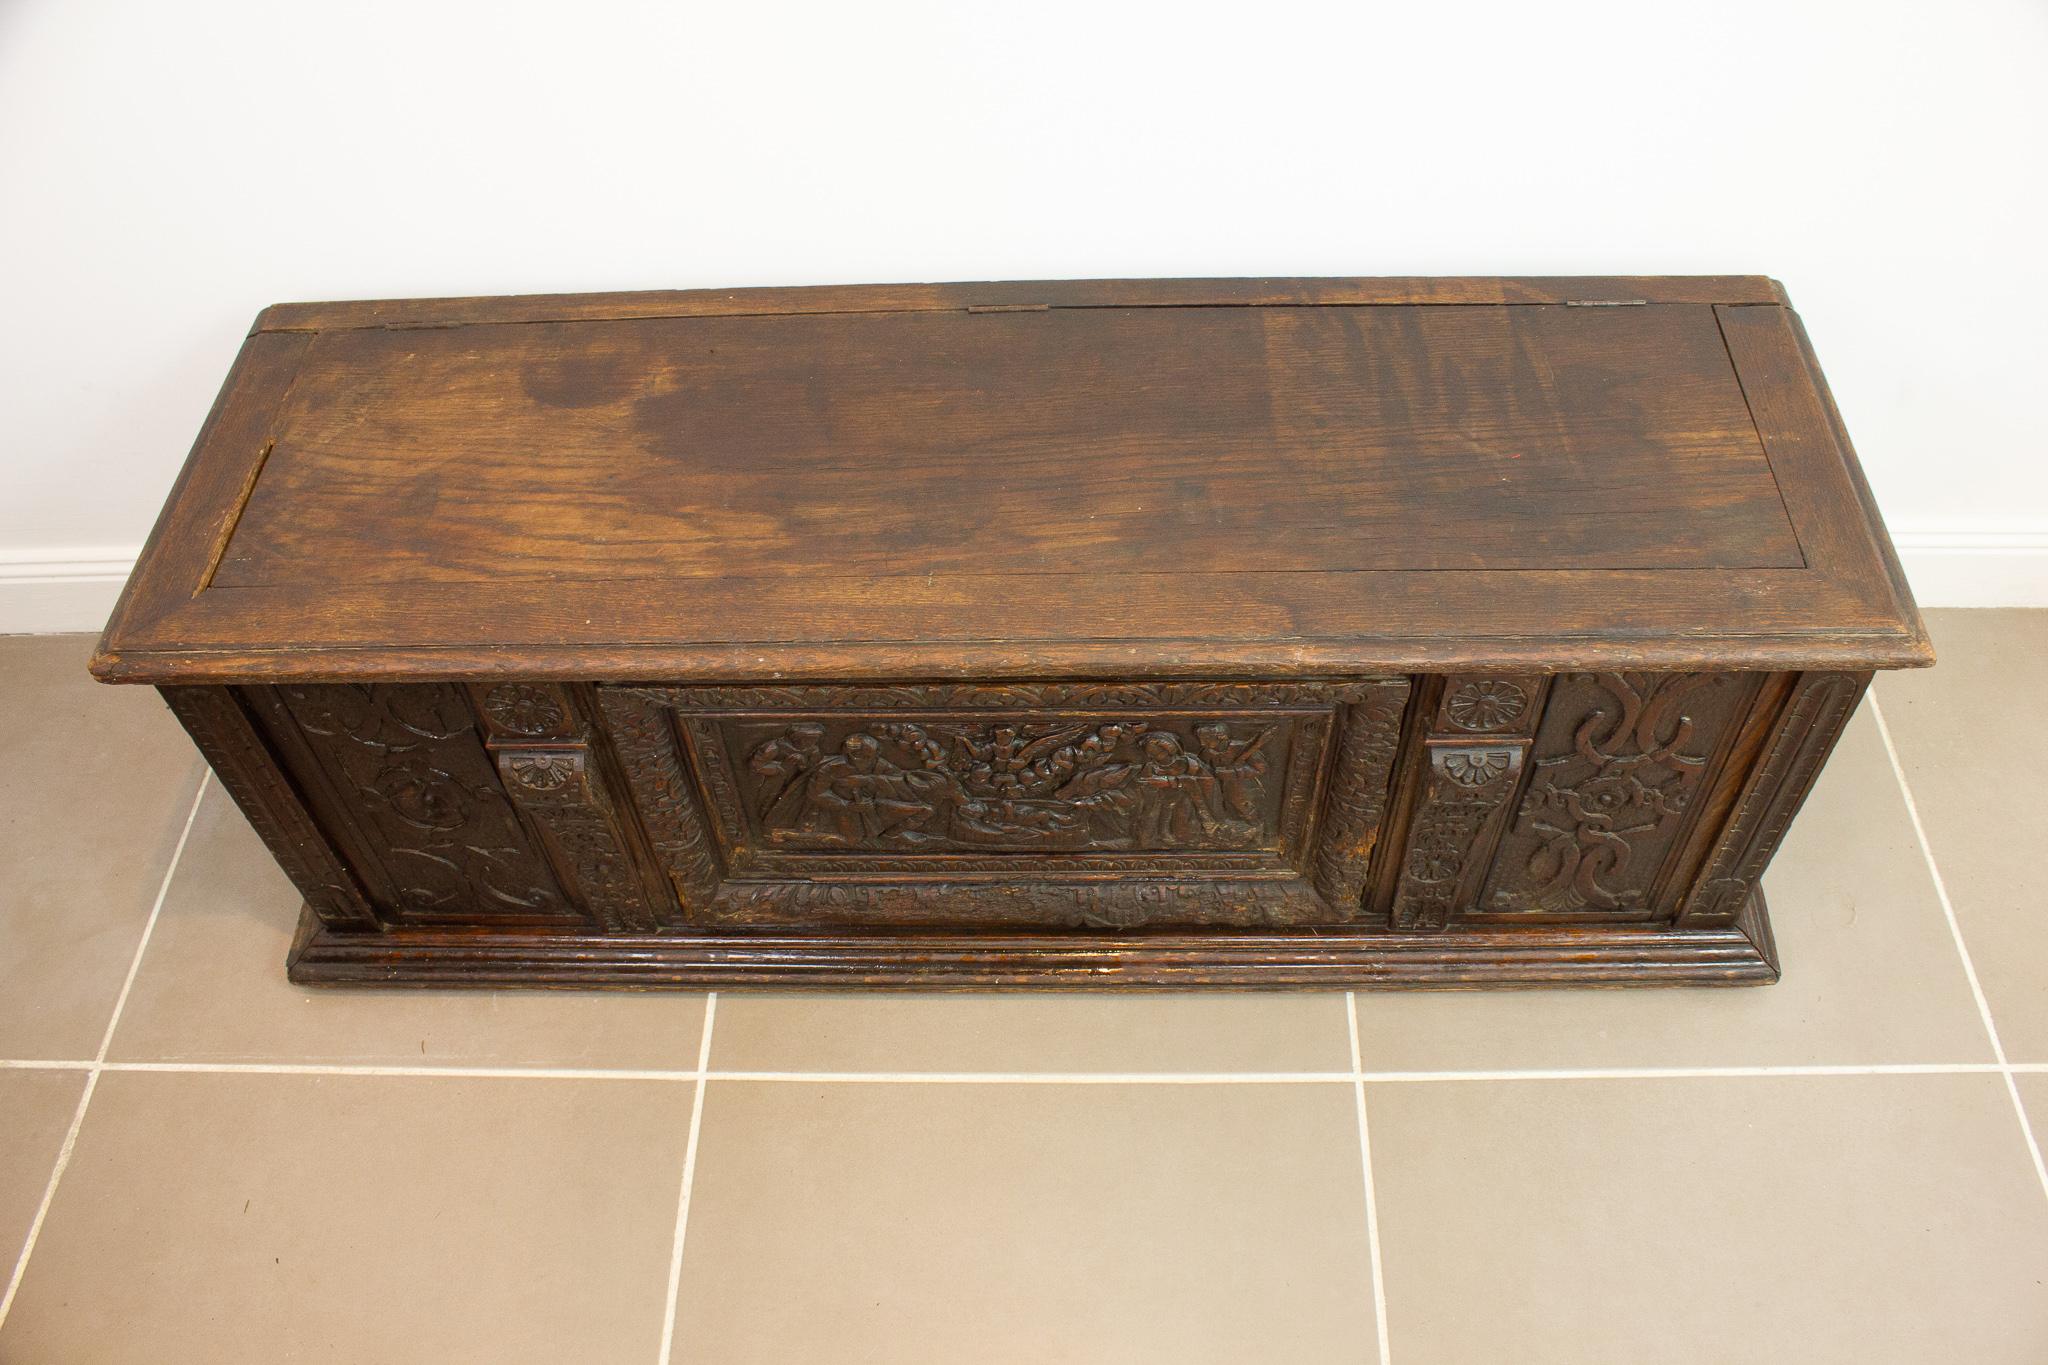 Magnificent Renaissance chest in carved wood dating from the 17th century. It is decorated with plant and floral motifs. In the center of the composition, a religious scene represents the birth of Christ and the visit of the Magi.
Beautiful and